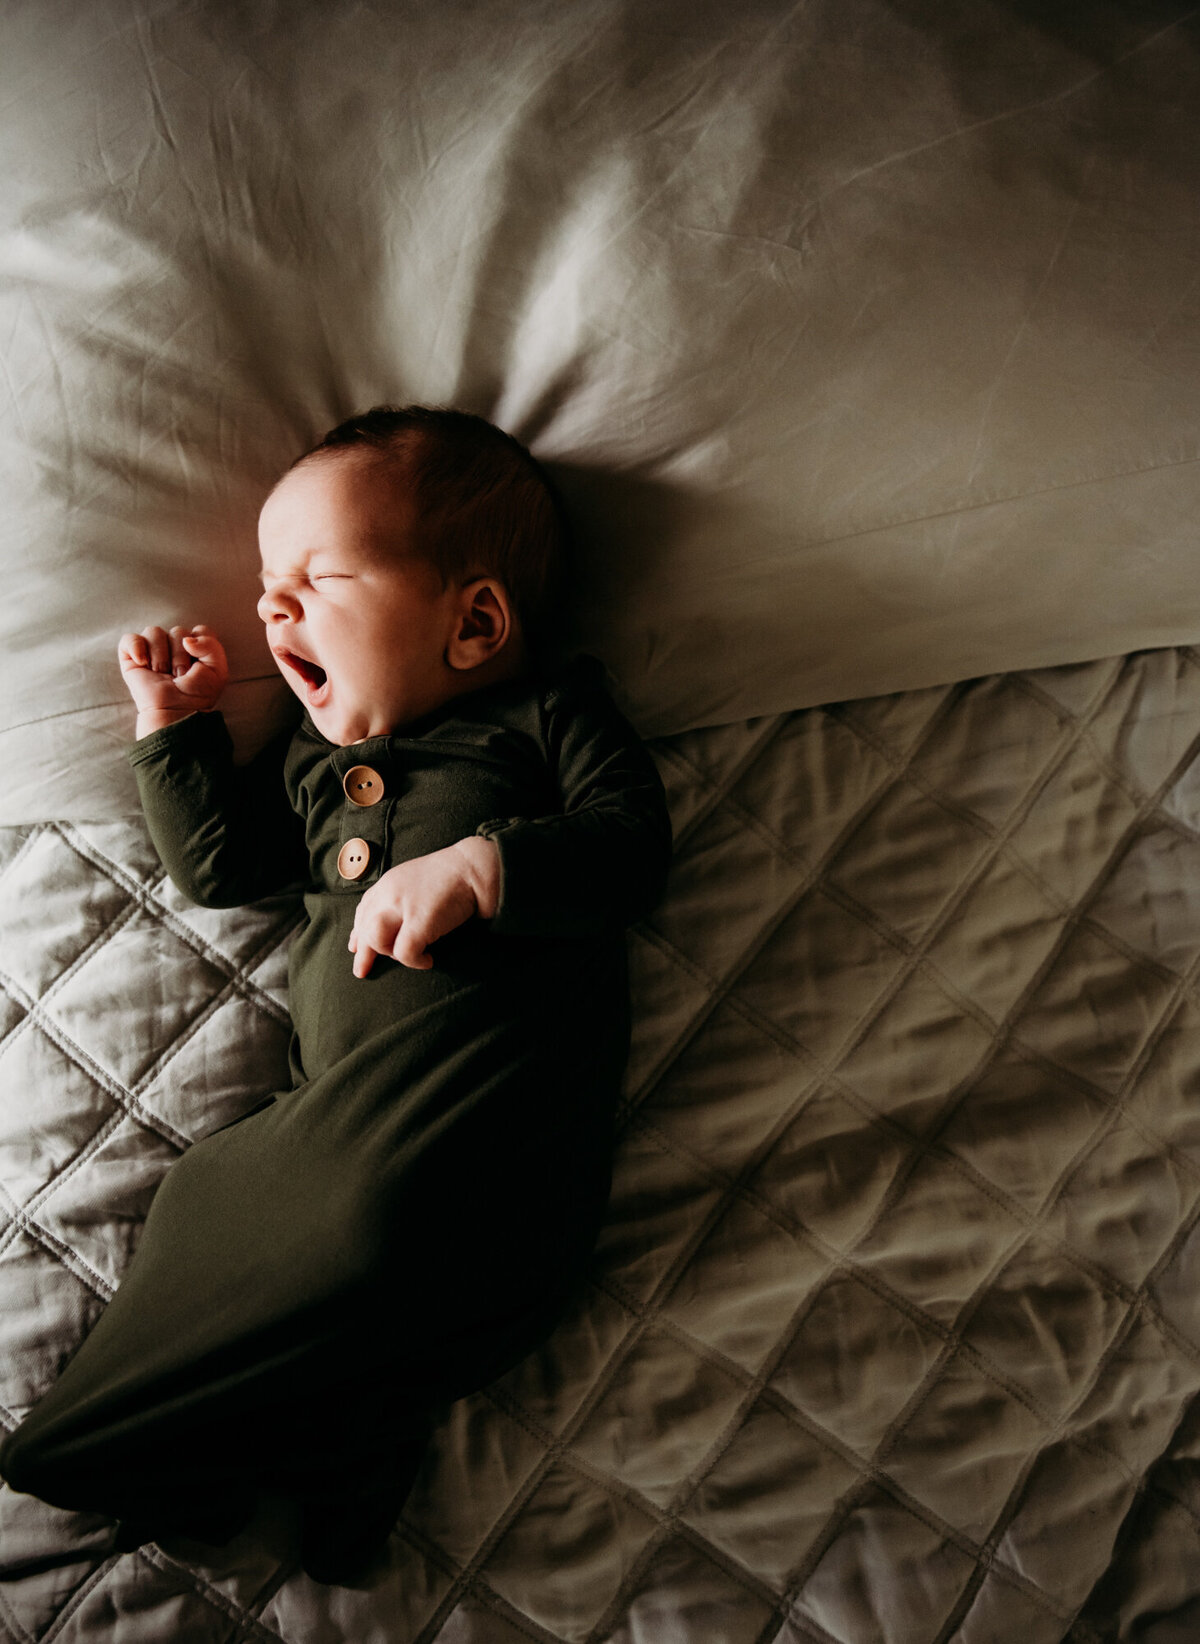 Newborn Photographer, Little boy in a green outfit yawning on a bed.